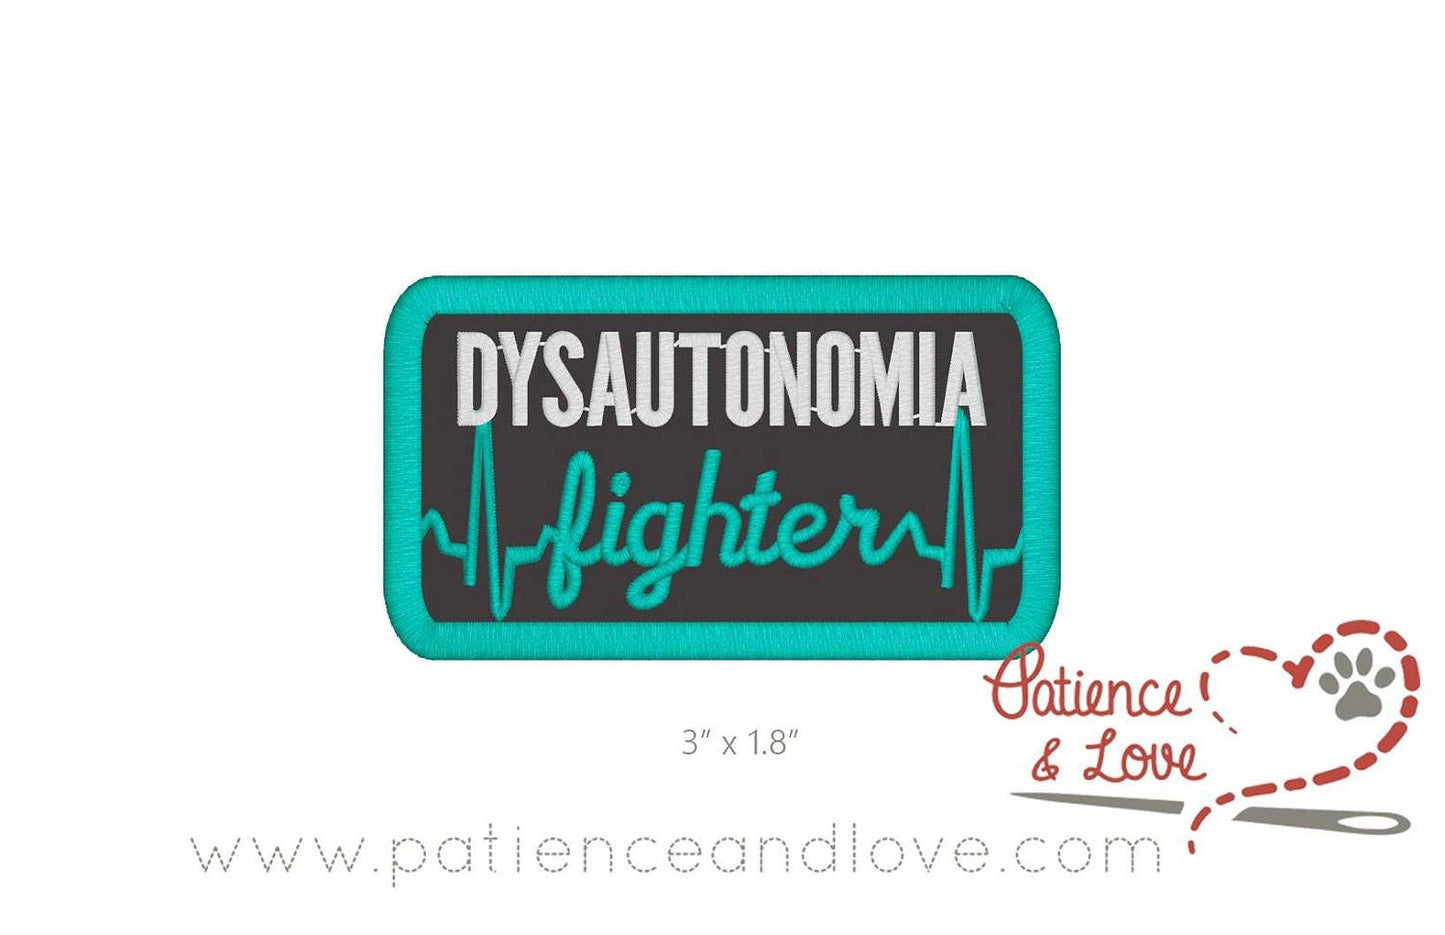 Dysautonomia Fighter, with fighter as an ekg, 3 x 1.8 inch rectangular patch